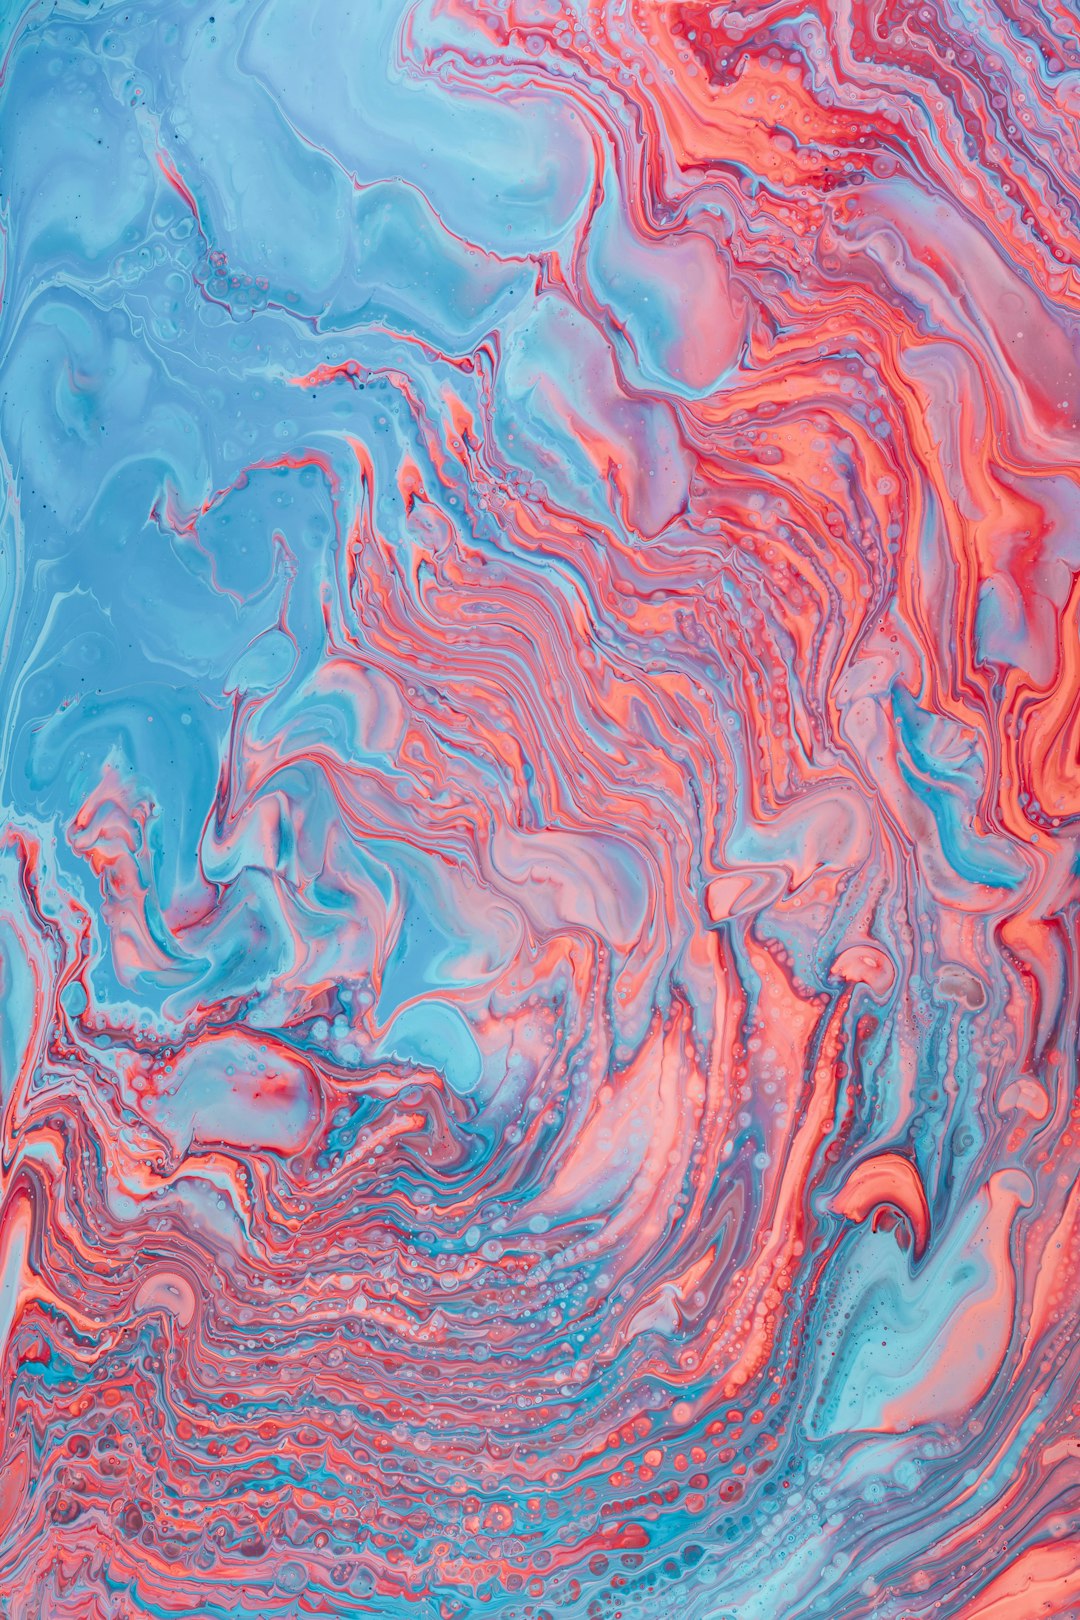 Abstract fluid art in coral pink and sky blue, resembling swirling marble patterns. The background is a gradient from light teal to dark red, creating an otherworldly atmosphere. High resolution focuses on the intricate details of each swirl for an elegant effect. –ar 85:128